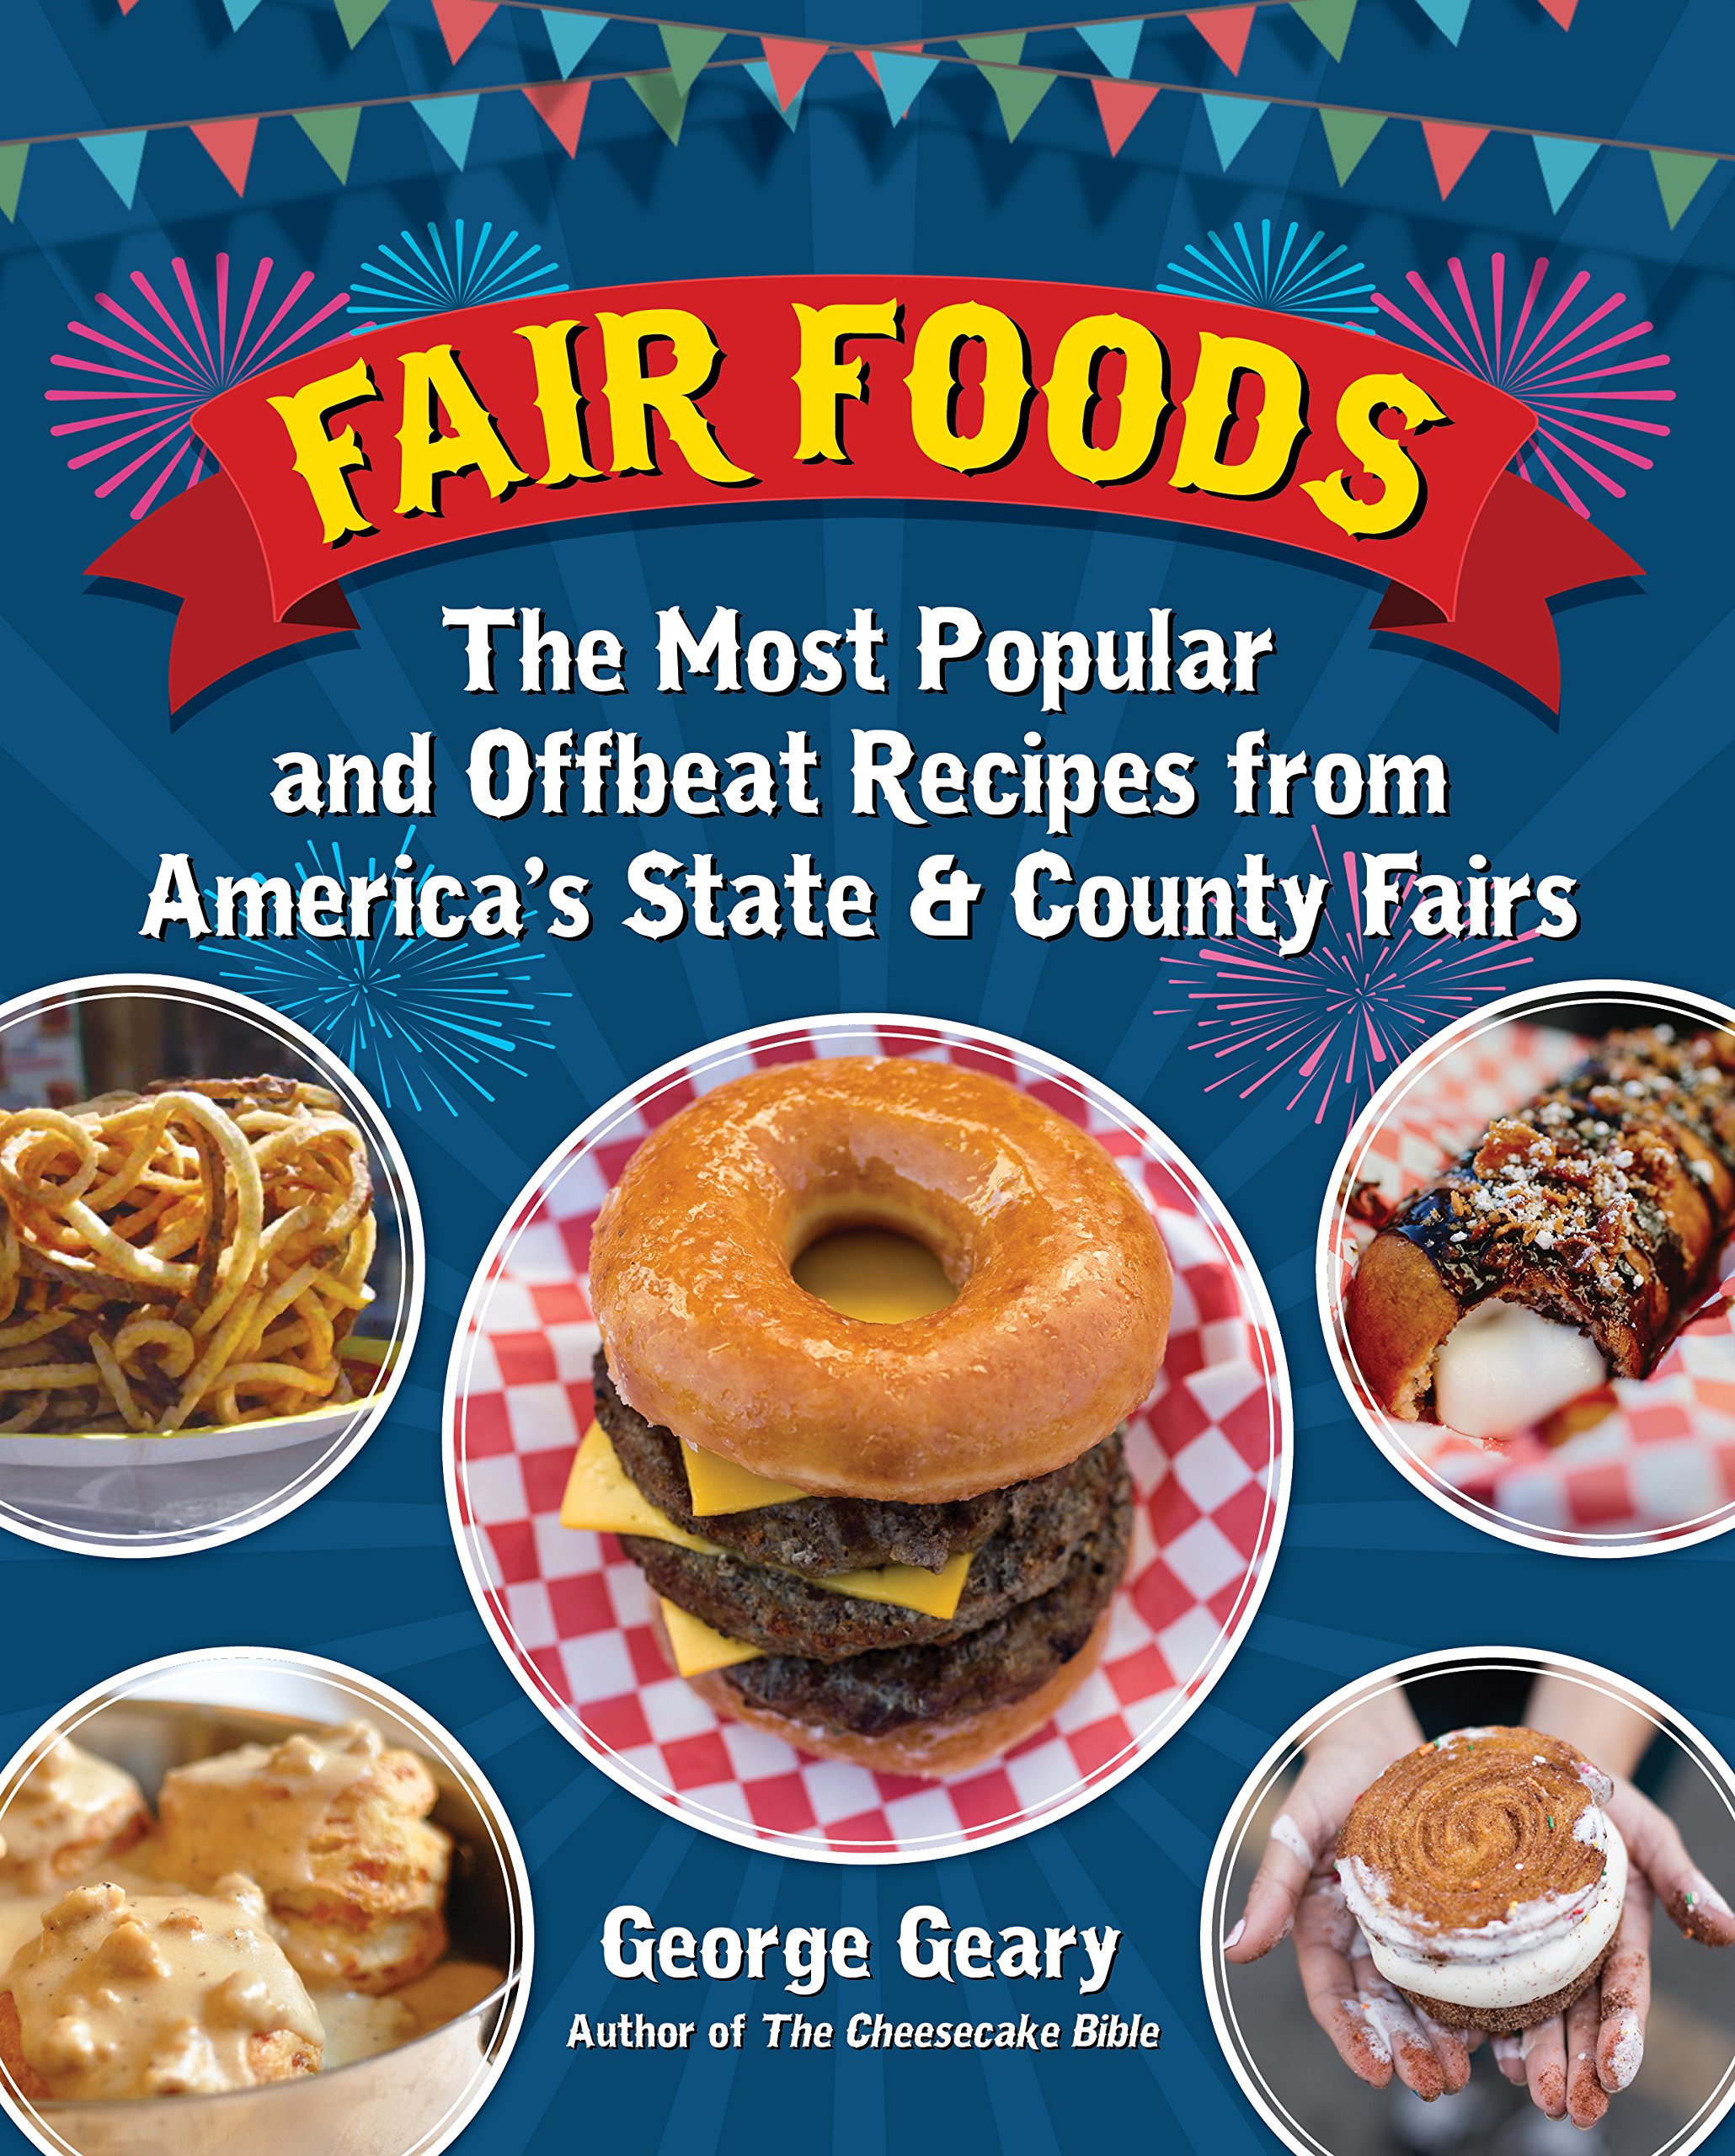 Fair Foods The Most Popular and Offbeat Recipes from America's State